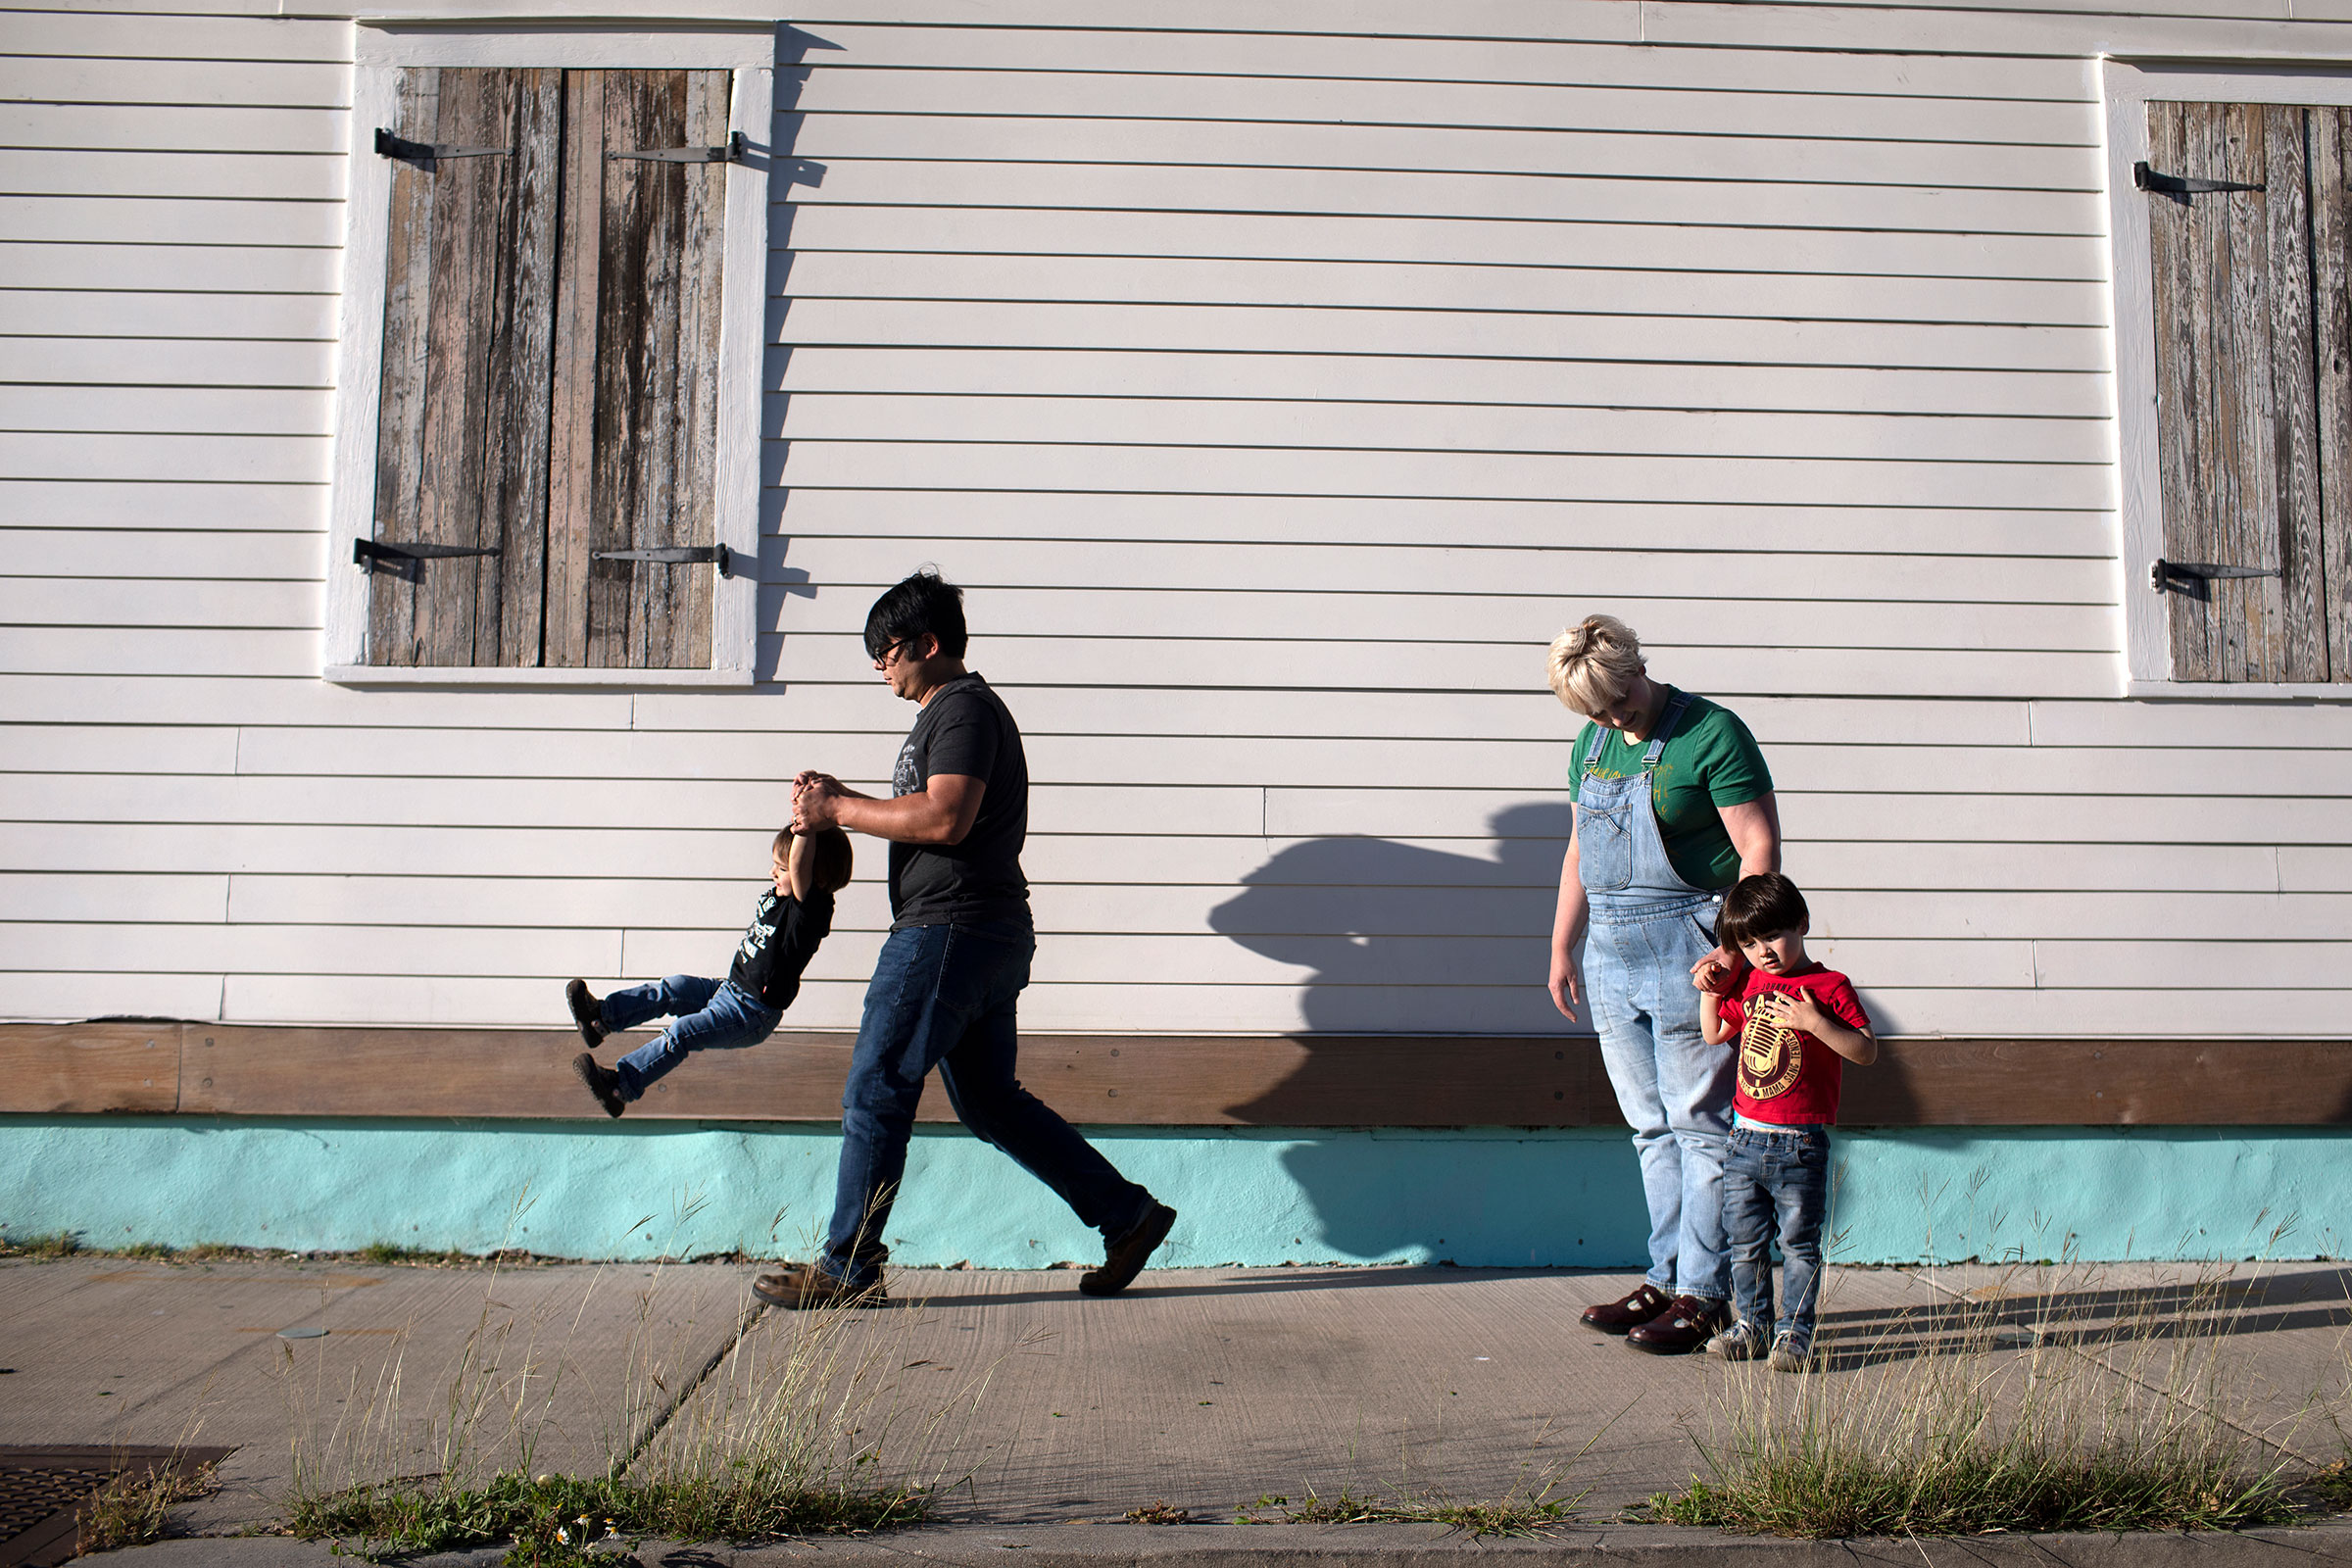 Mickey Harrison and his wife Laurie Halbrook take their kids eighteen month old Jack, left, and Michael, 3, on a walk through their neighborhood in New Orleans. (Kathleen Flynn for TIME)